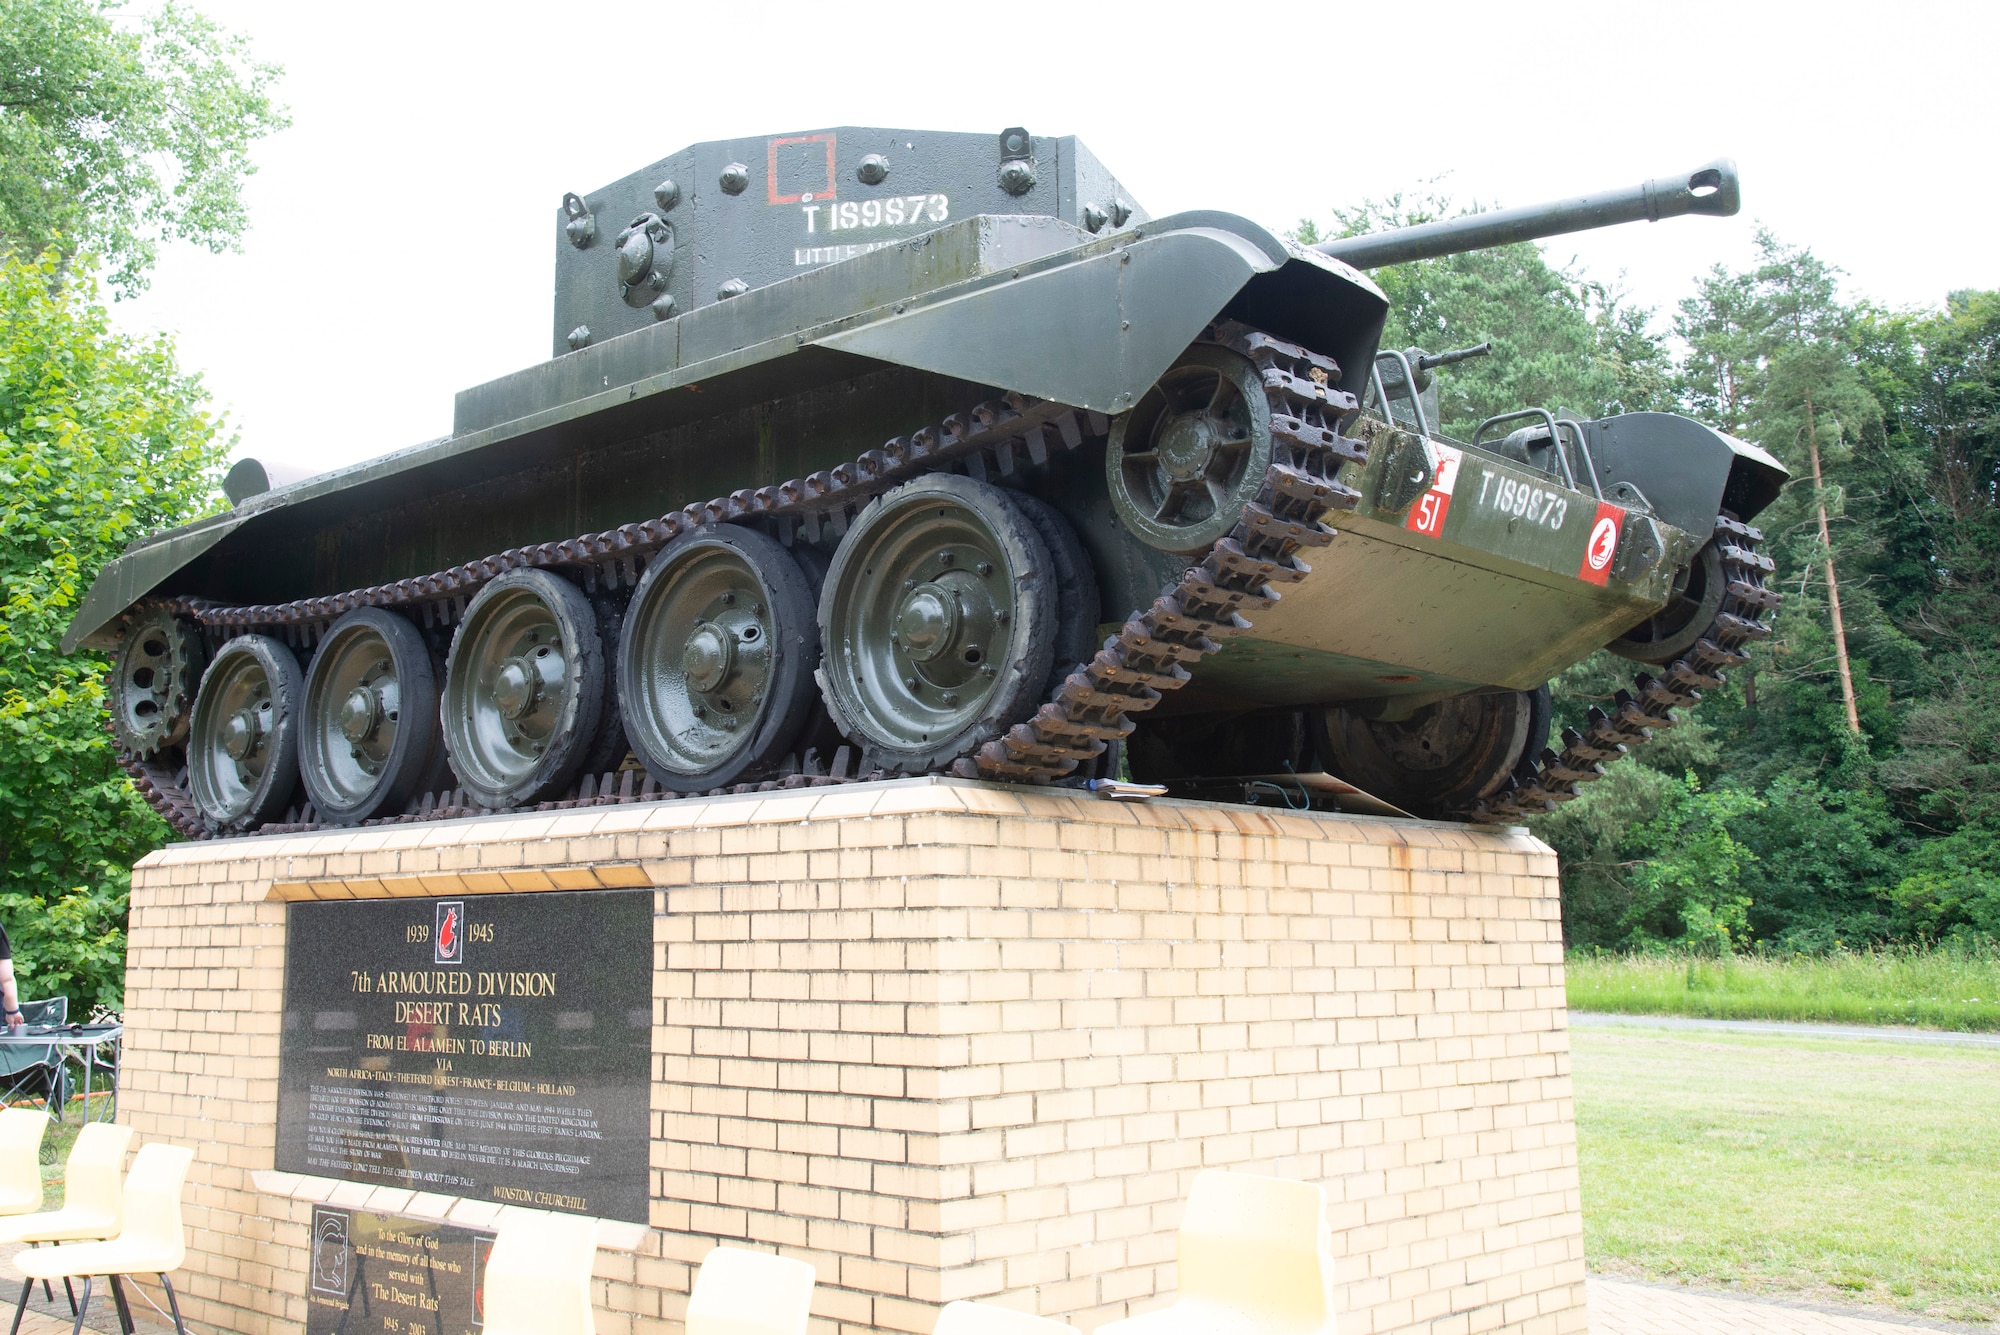 A Cromwell Mark IV tank “Little Audrey” sits on top of the Desert Rats memorial in High Ash, Thetford Forest, England, July 11, 2021. The Cromwell cruiser tank took part in the invasion of Normandy in June 1944 for the 7th Armoured Division Desert Rats which now sits in honor of those who have fallen during World War II. (U.S. Air Force photo by 1st Lt. Tyler Whiting)